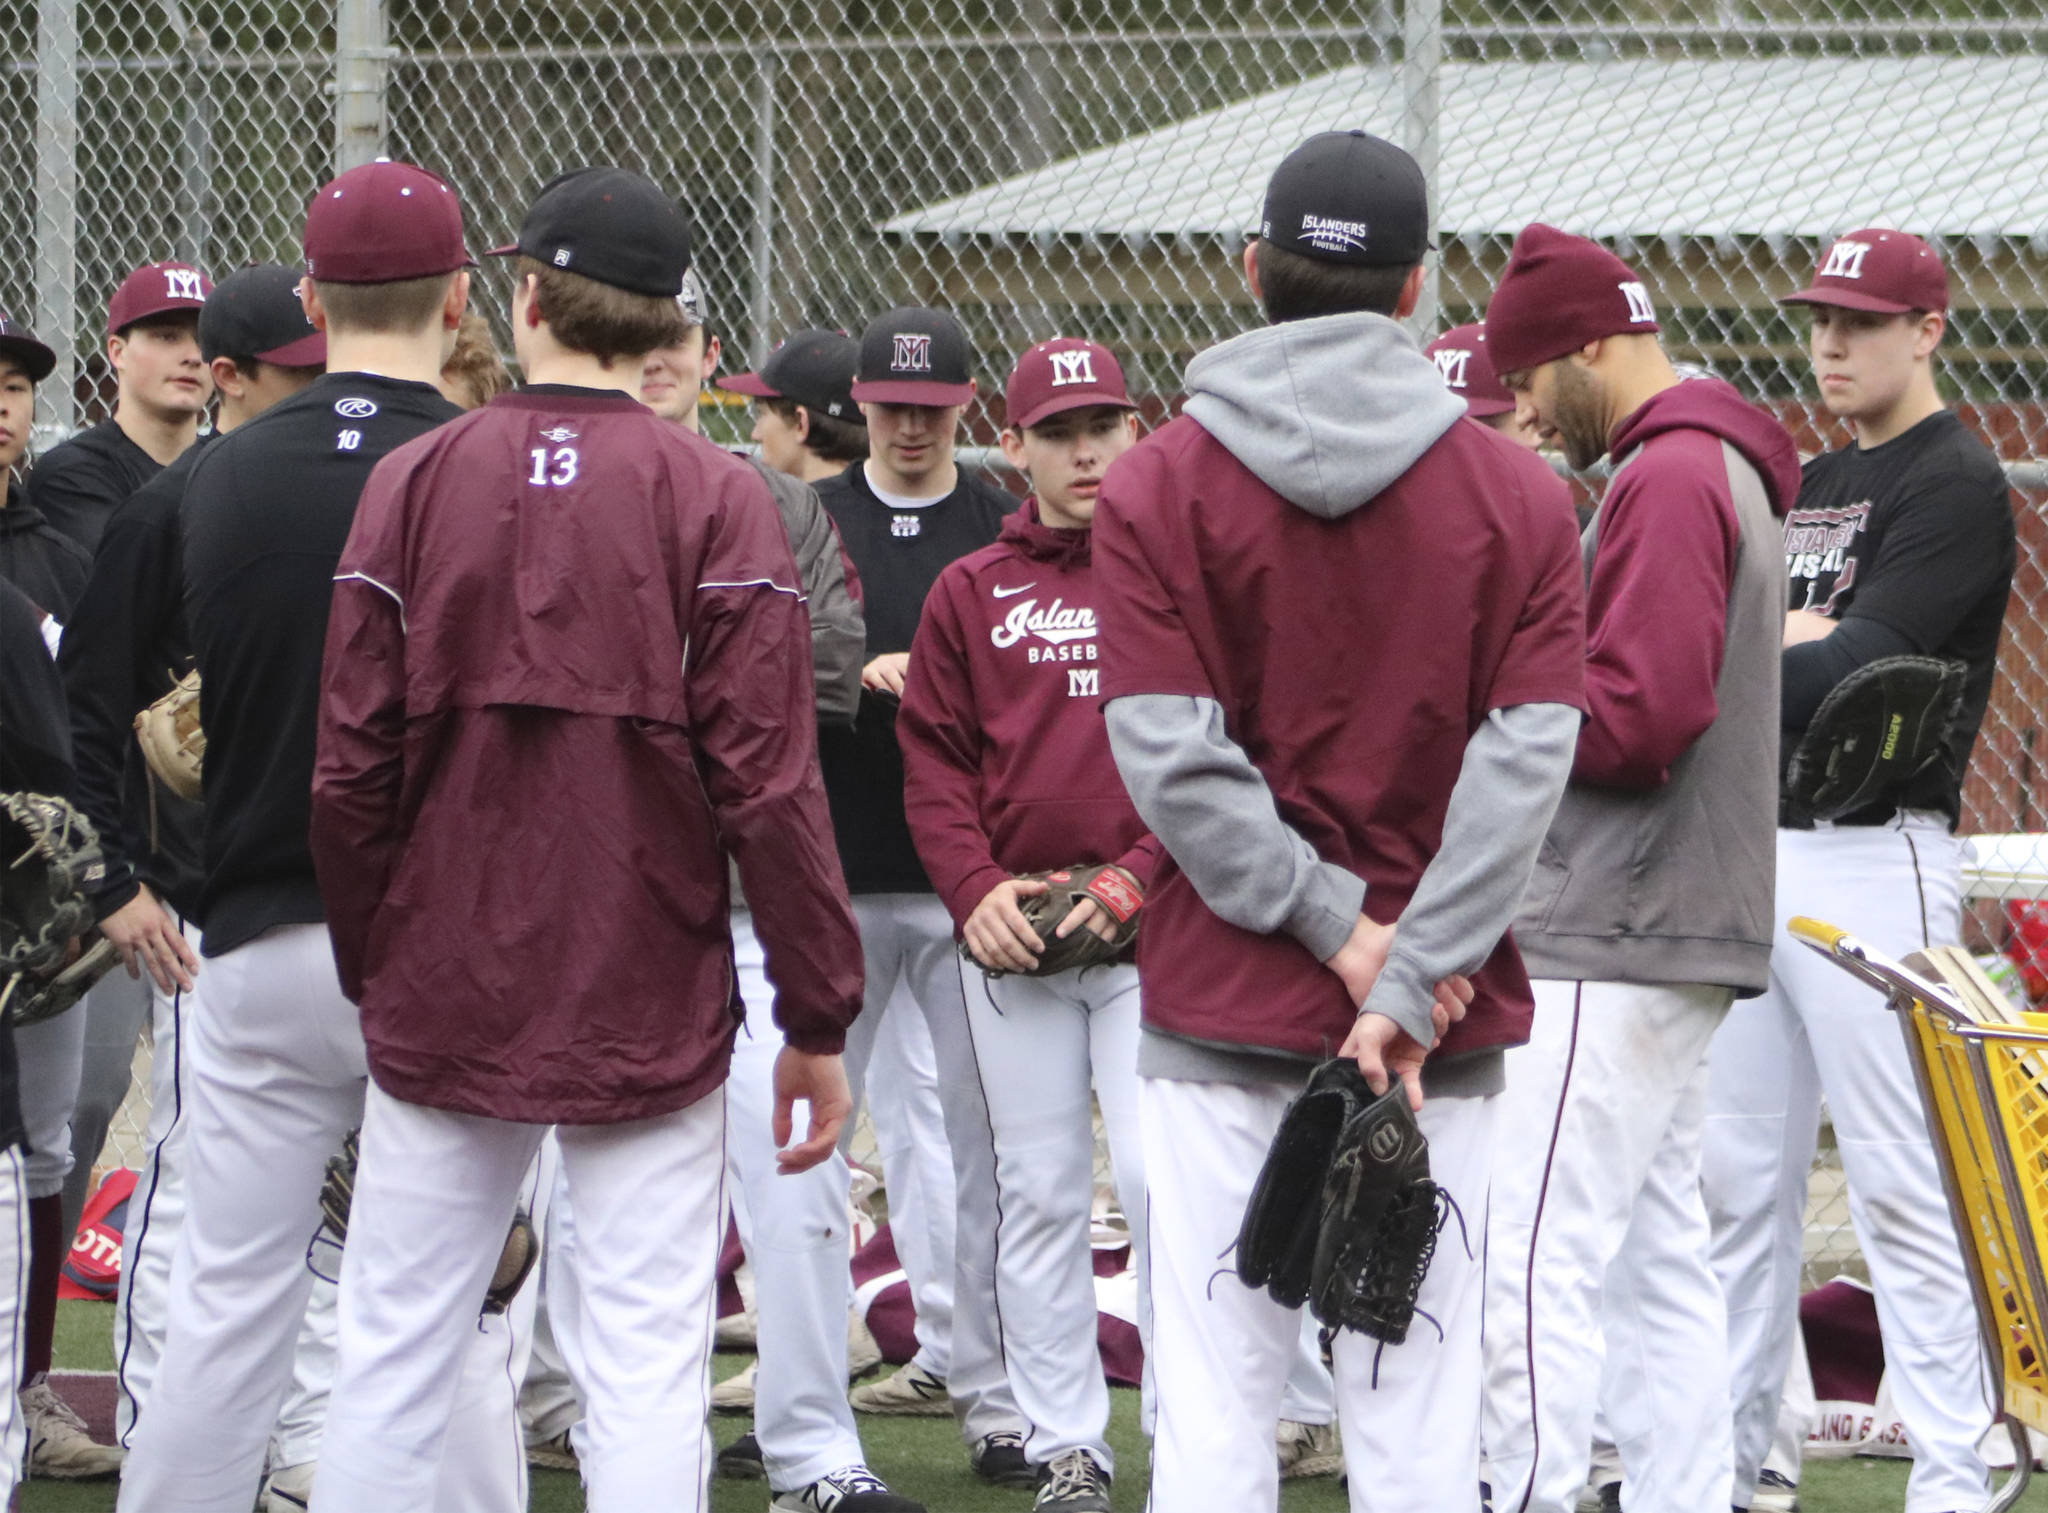 The Mercer Island baseball team gathers before a practice on March 5 at Island Crest Park. Benjamin Olson/staff photo